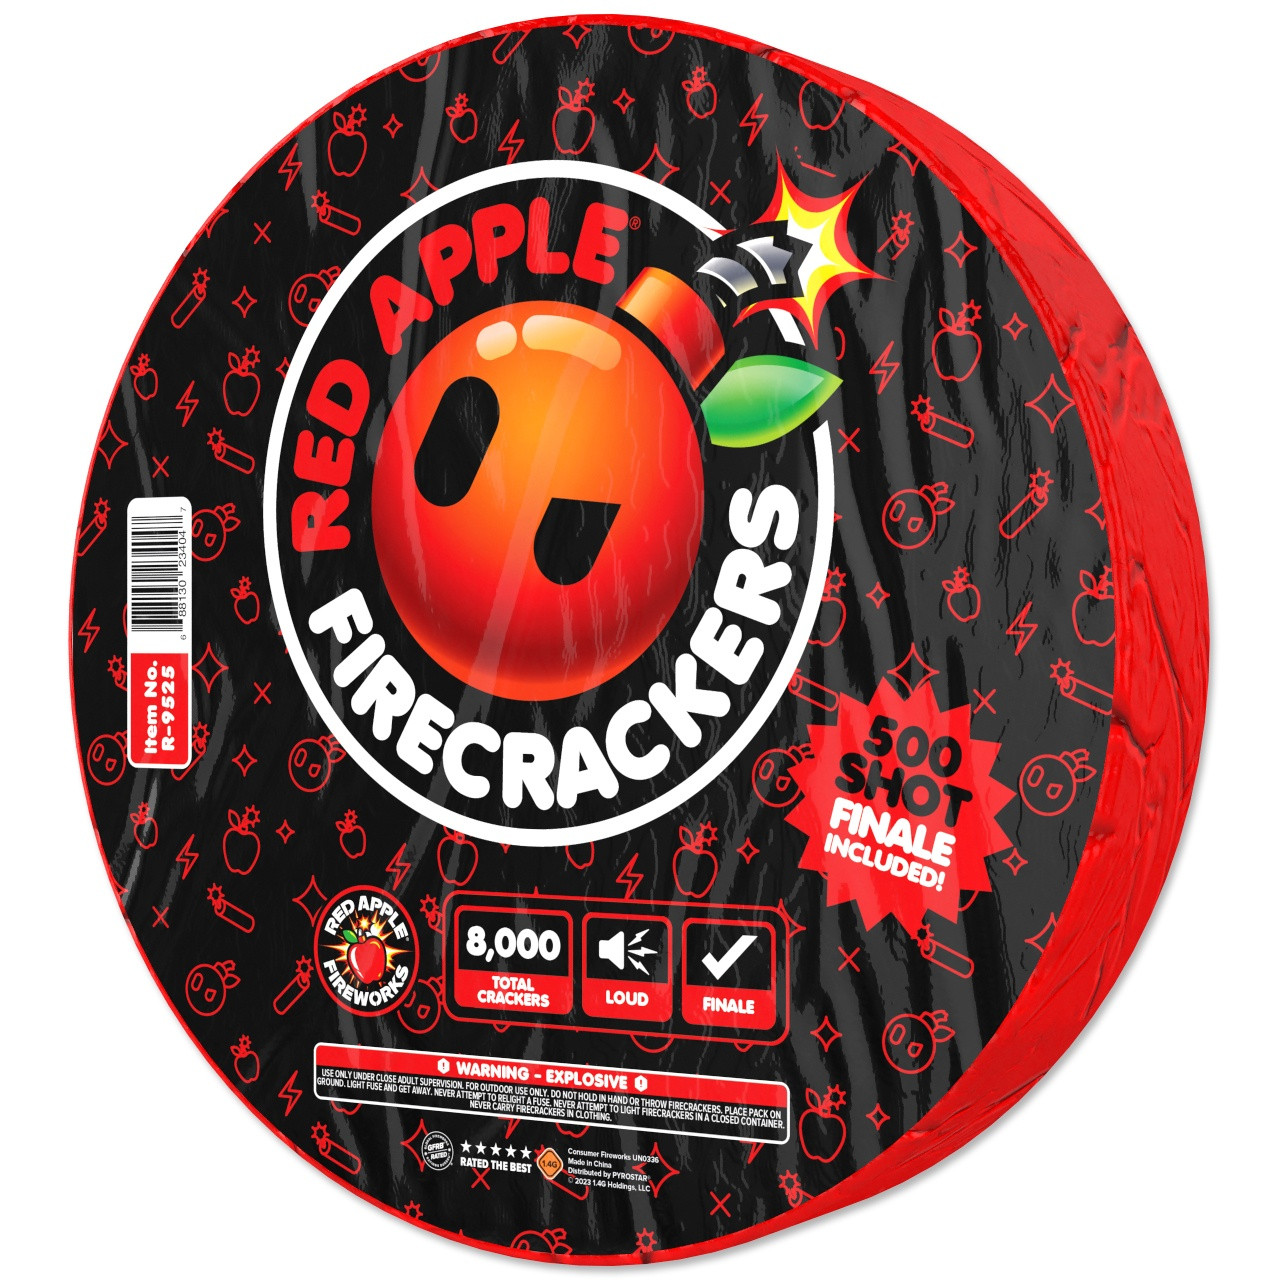 Red Apple Gift Card - Red Apple Fireworks